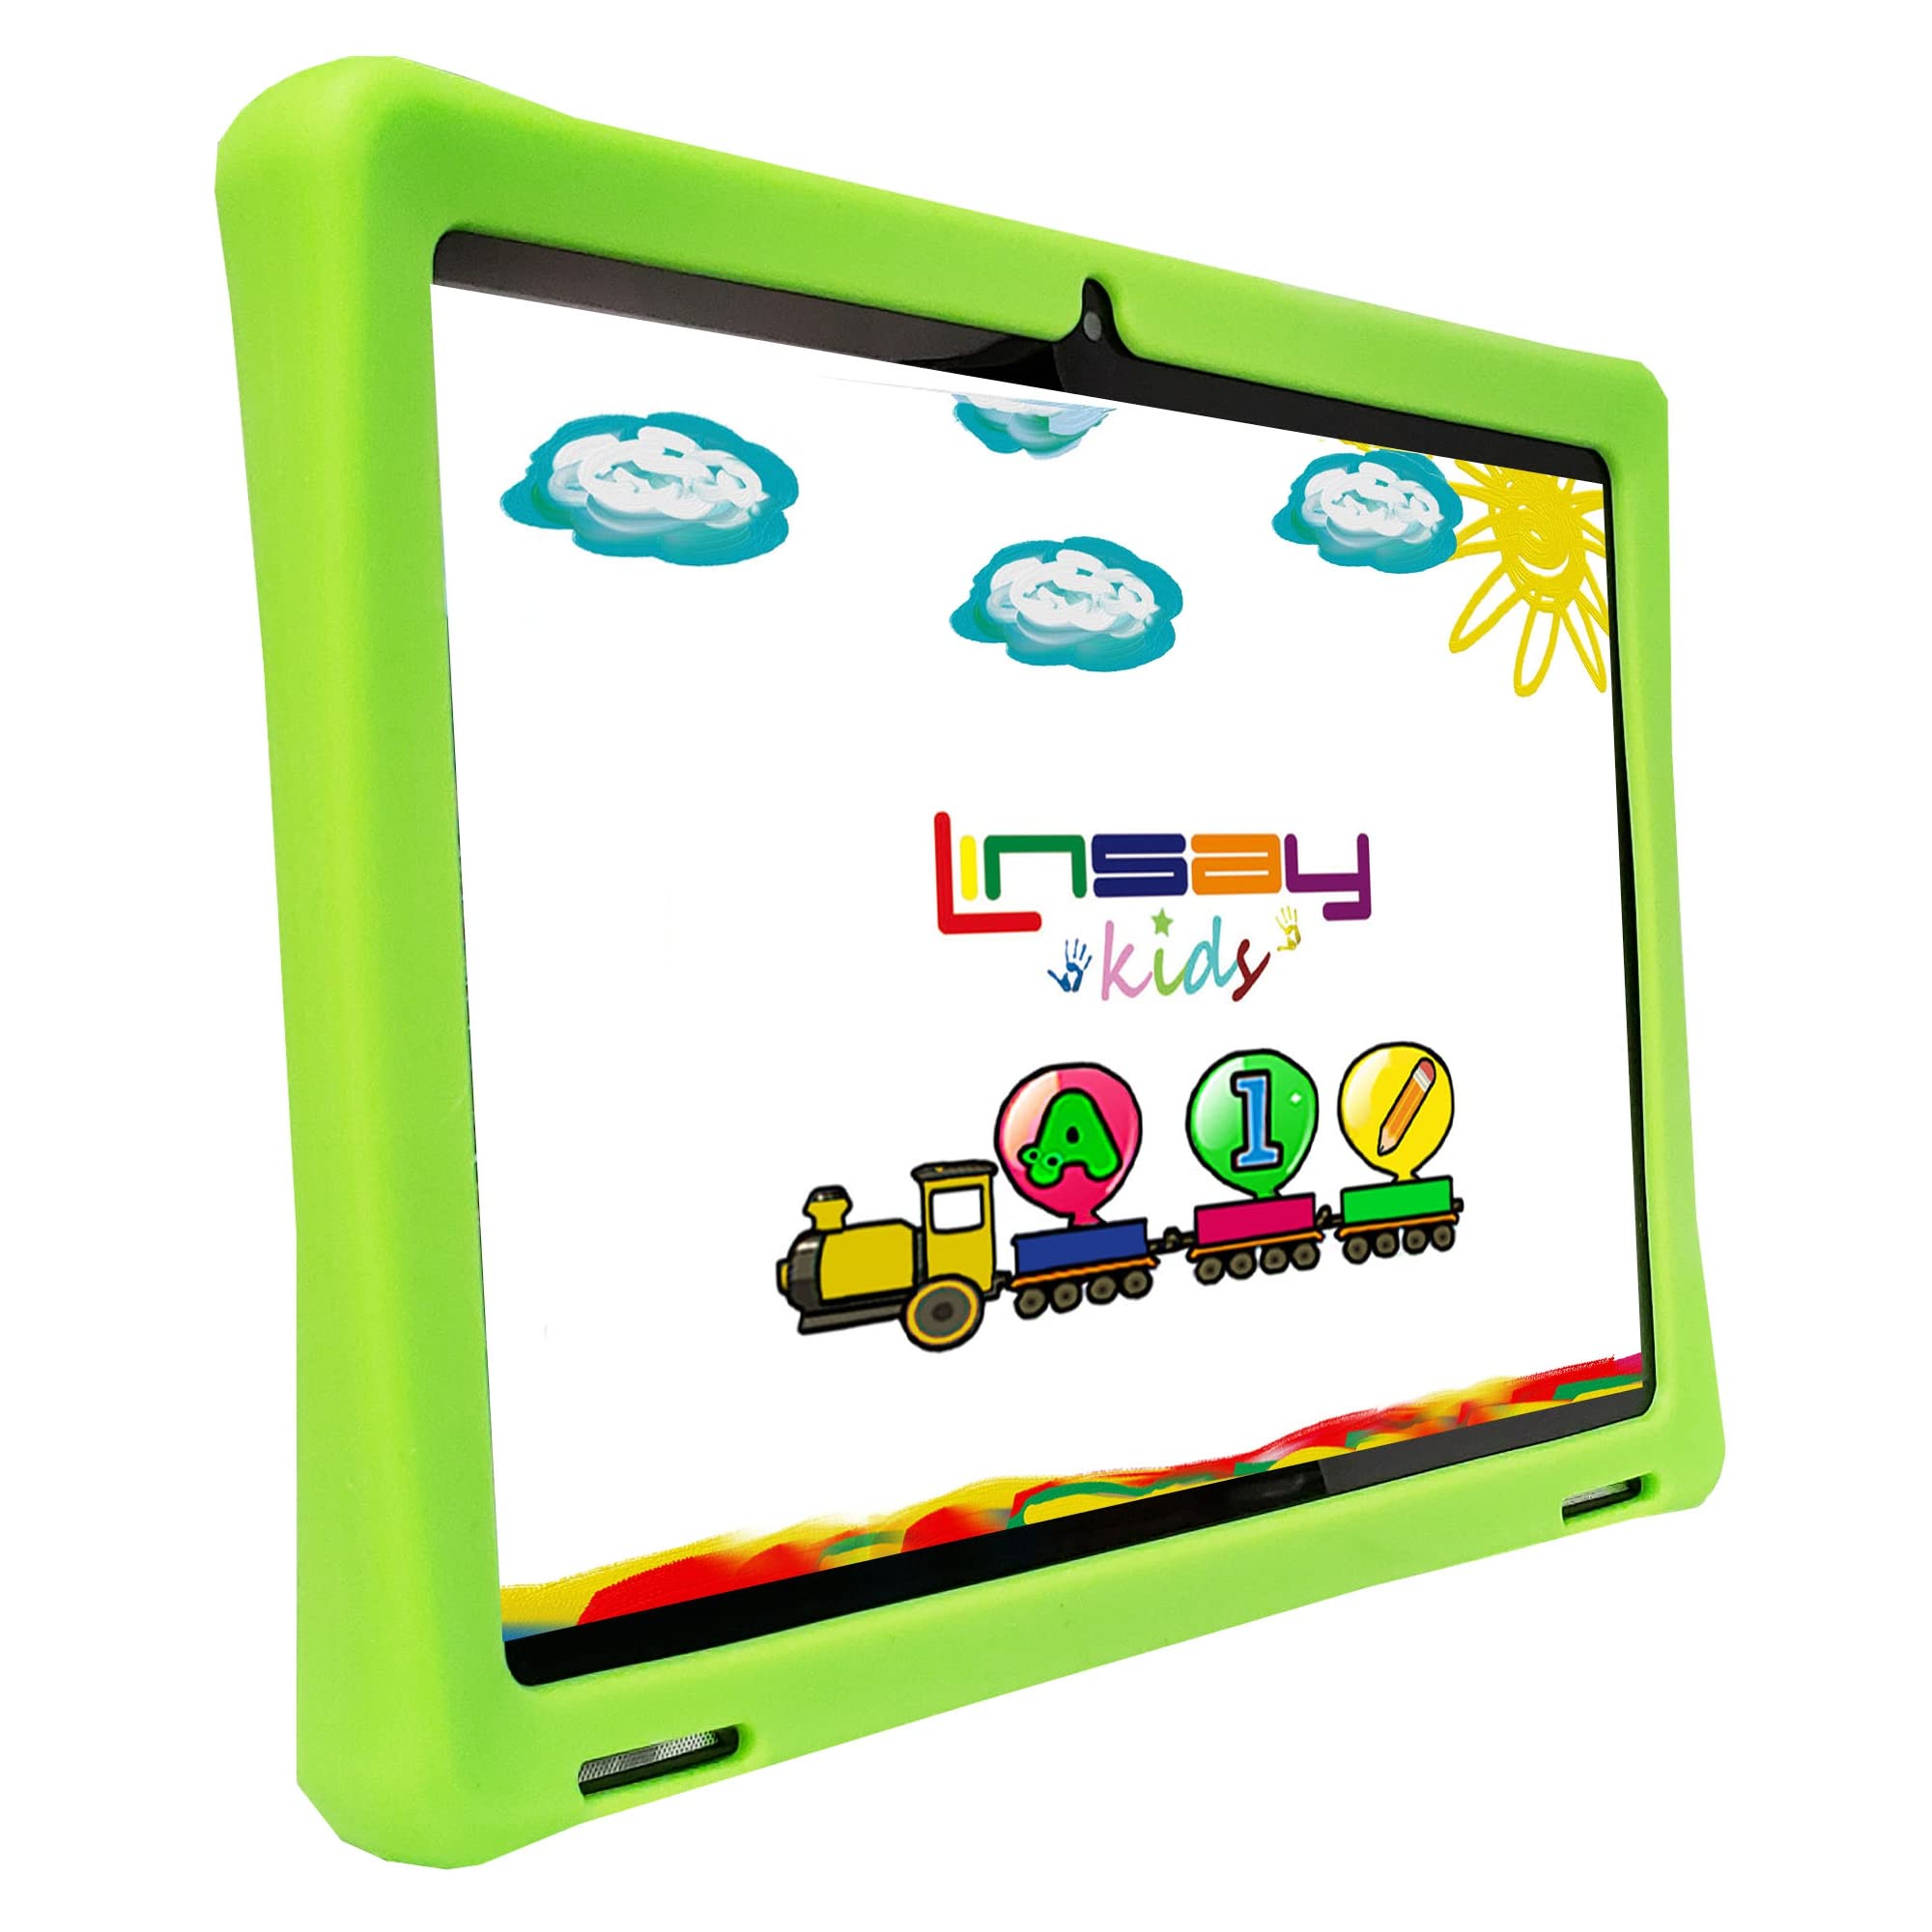 LINSAY 10.1" 1280x800 IPS 2GB RAM 32GB Android 11 Tablet with Kids Green Defender Case, Pop Holder and Pen Stylus